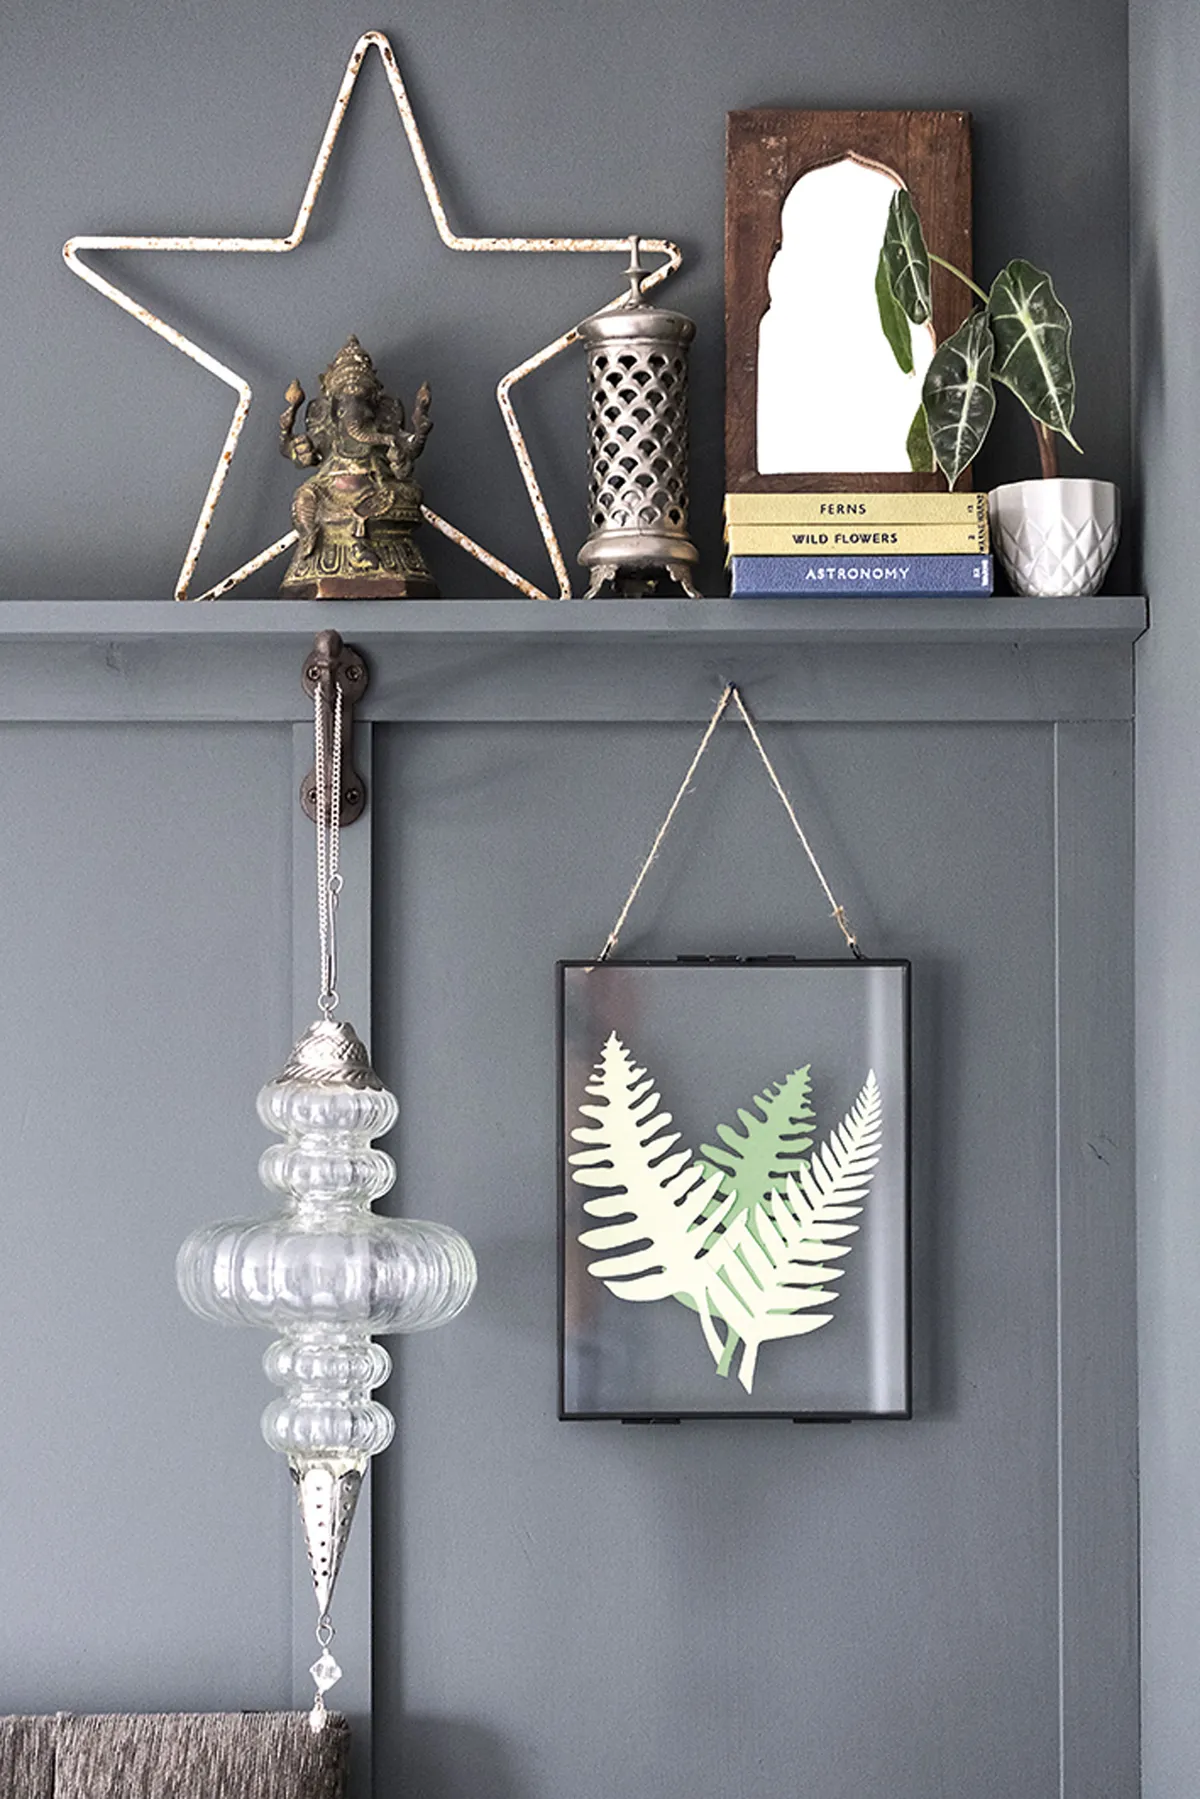 Colin added a ledge shelf for prints and trinkets, and Sarah framed the bed with glass ornaments hung on hooks to add interest. The botanical artwork is Colin’s – he created it from cut-out paper leaves